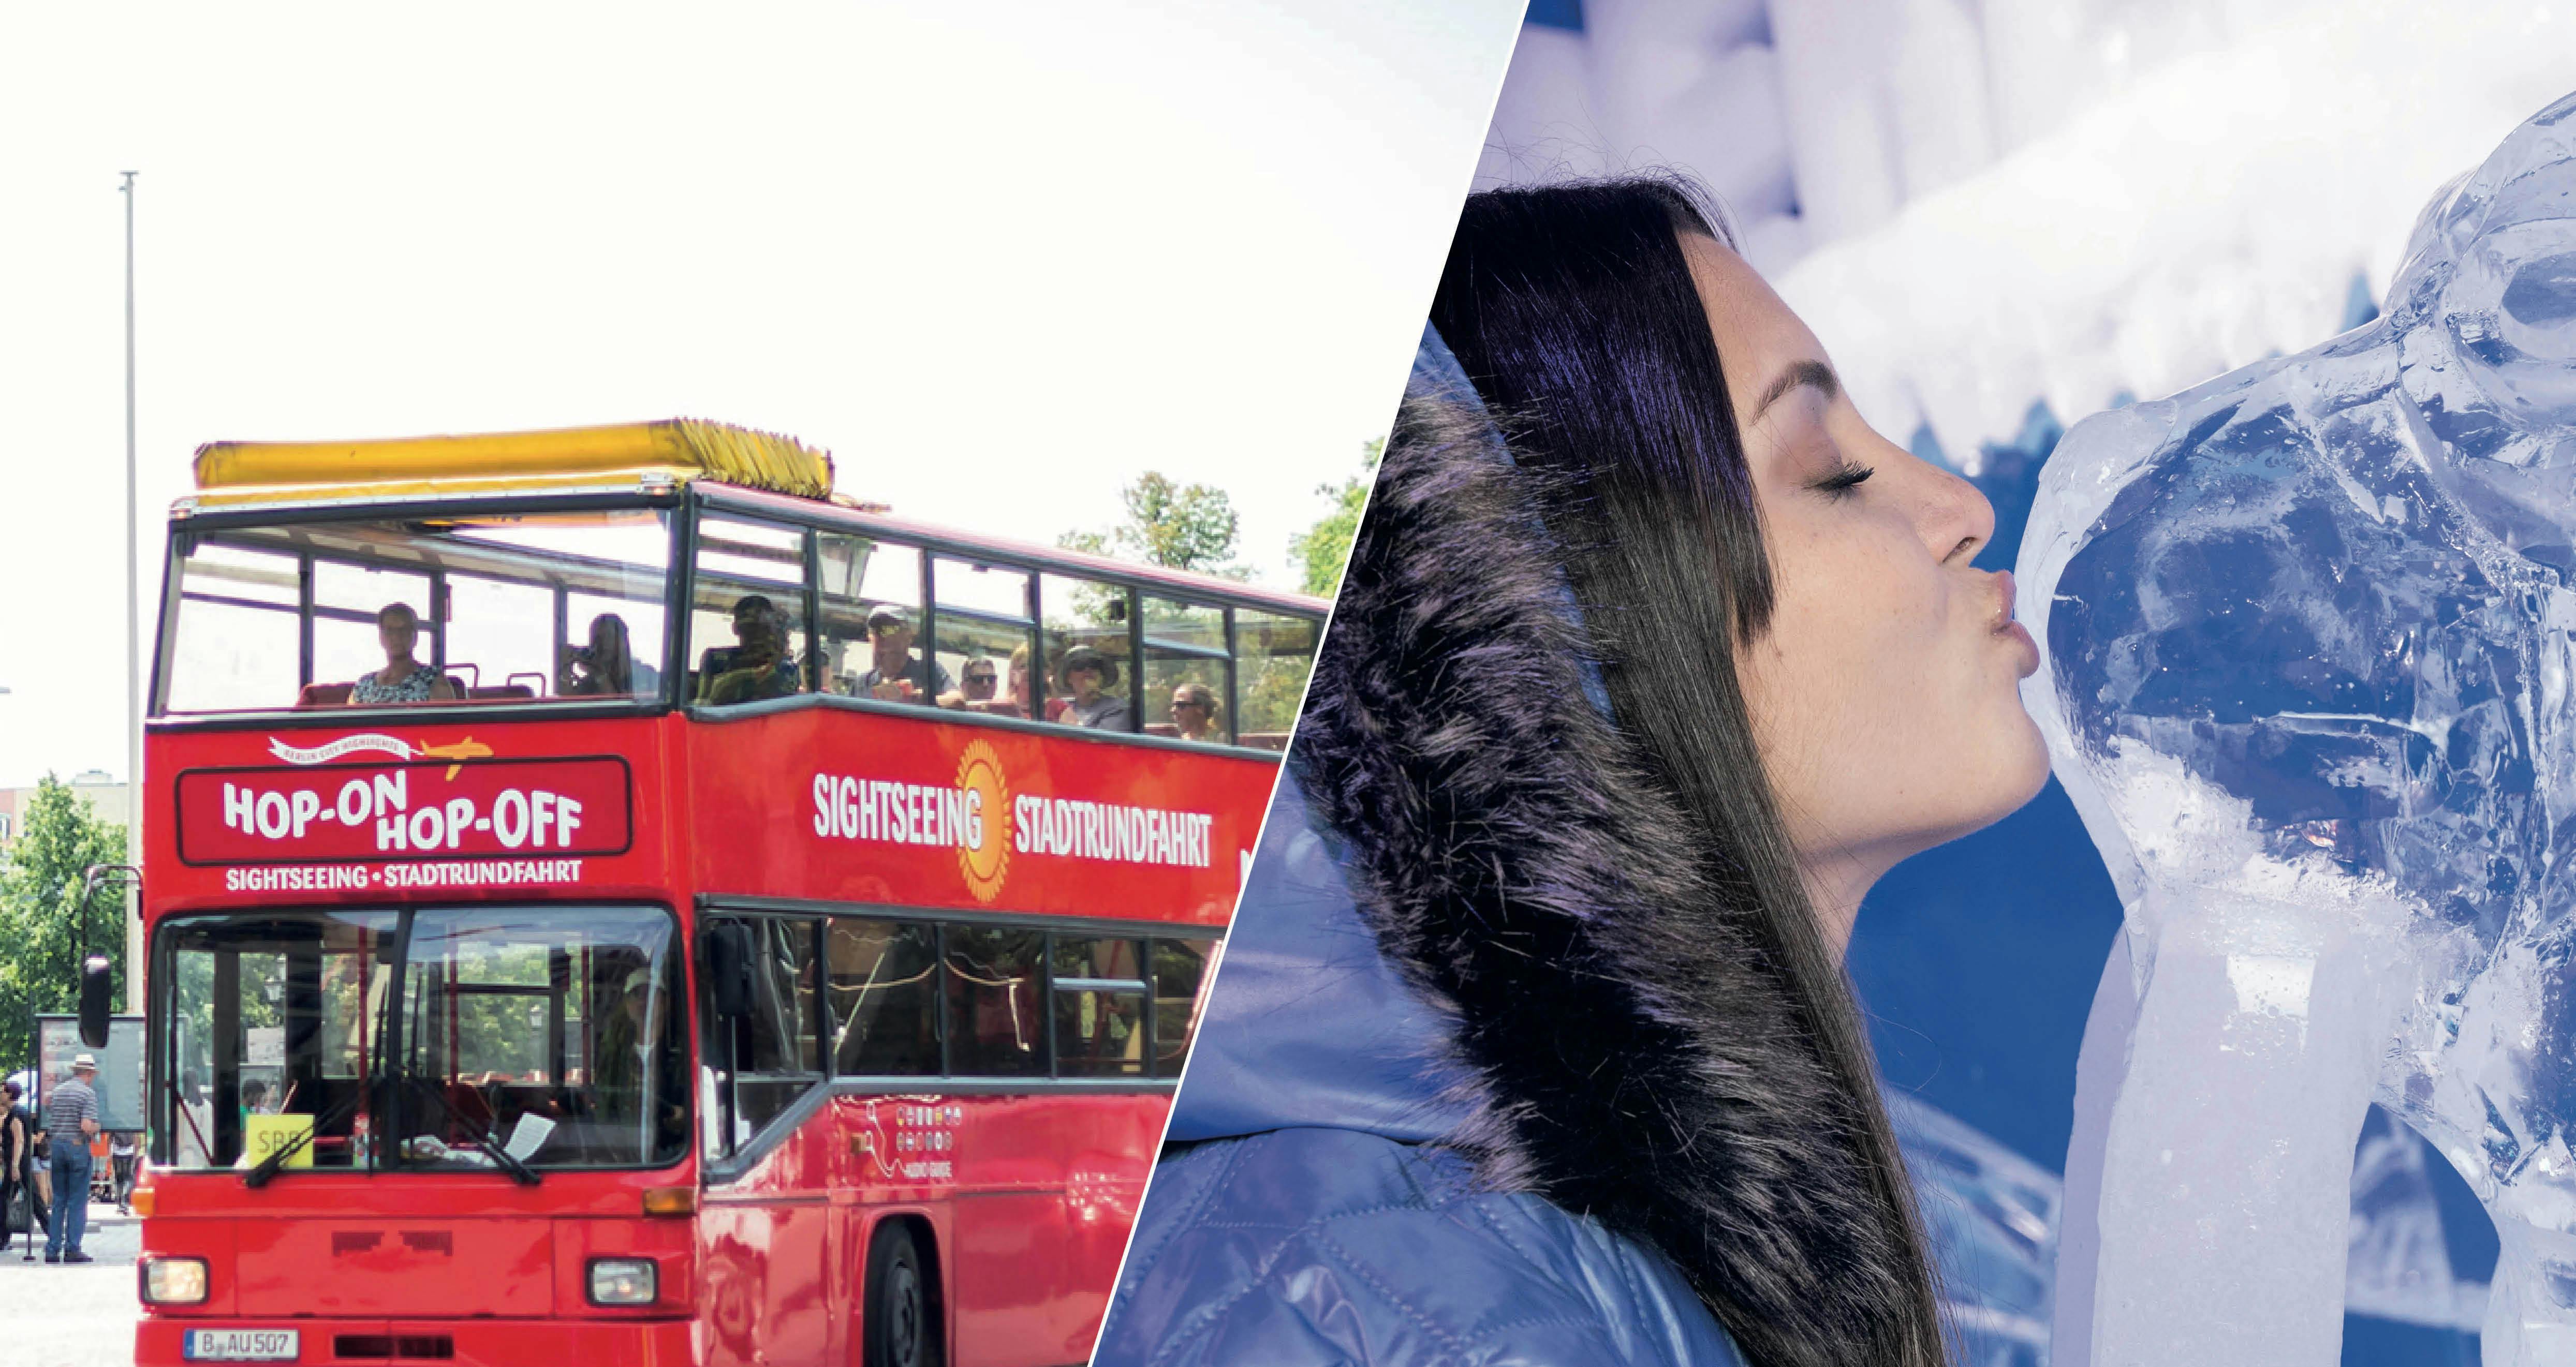 Berlin Icebar and 24 hour hop-on hop-off bus ticket